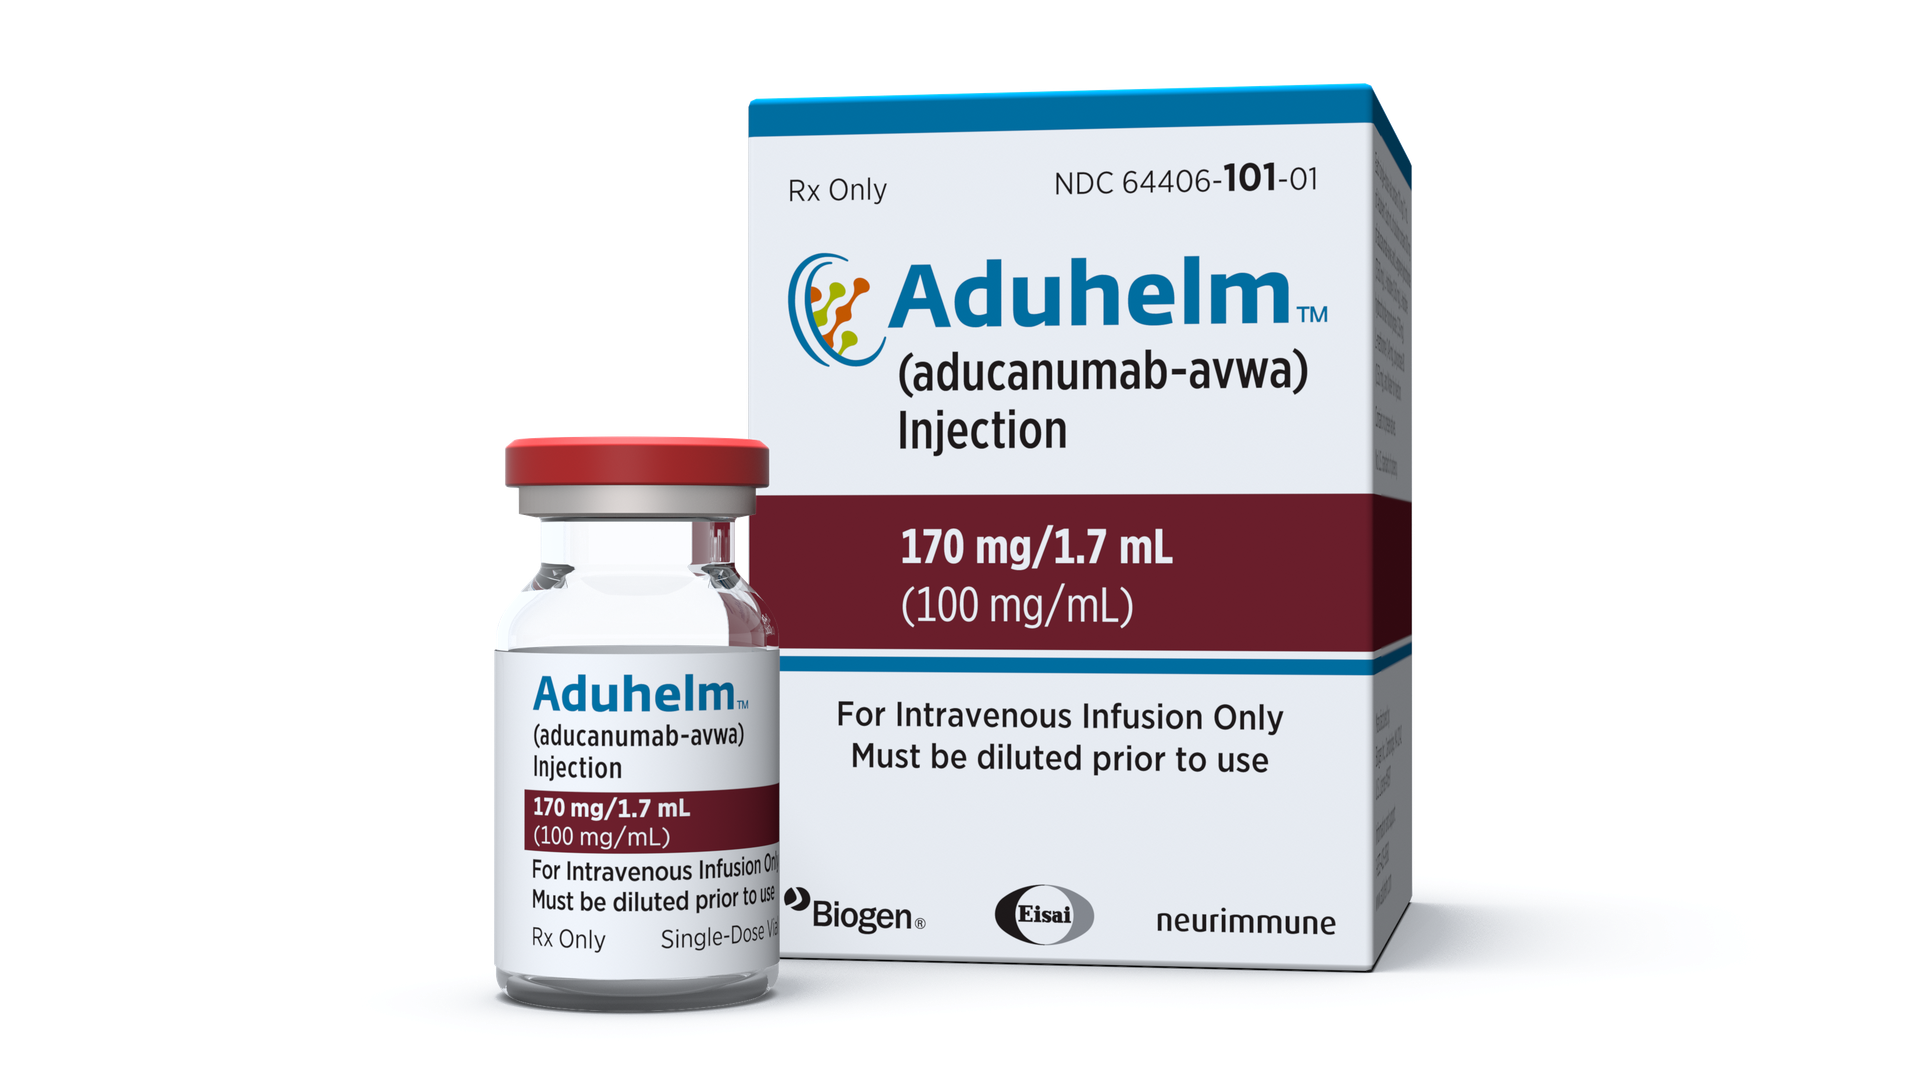 A box and vial of Aduhelm against a white background.